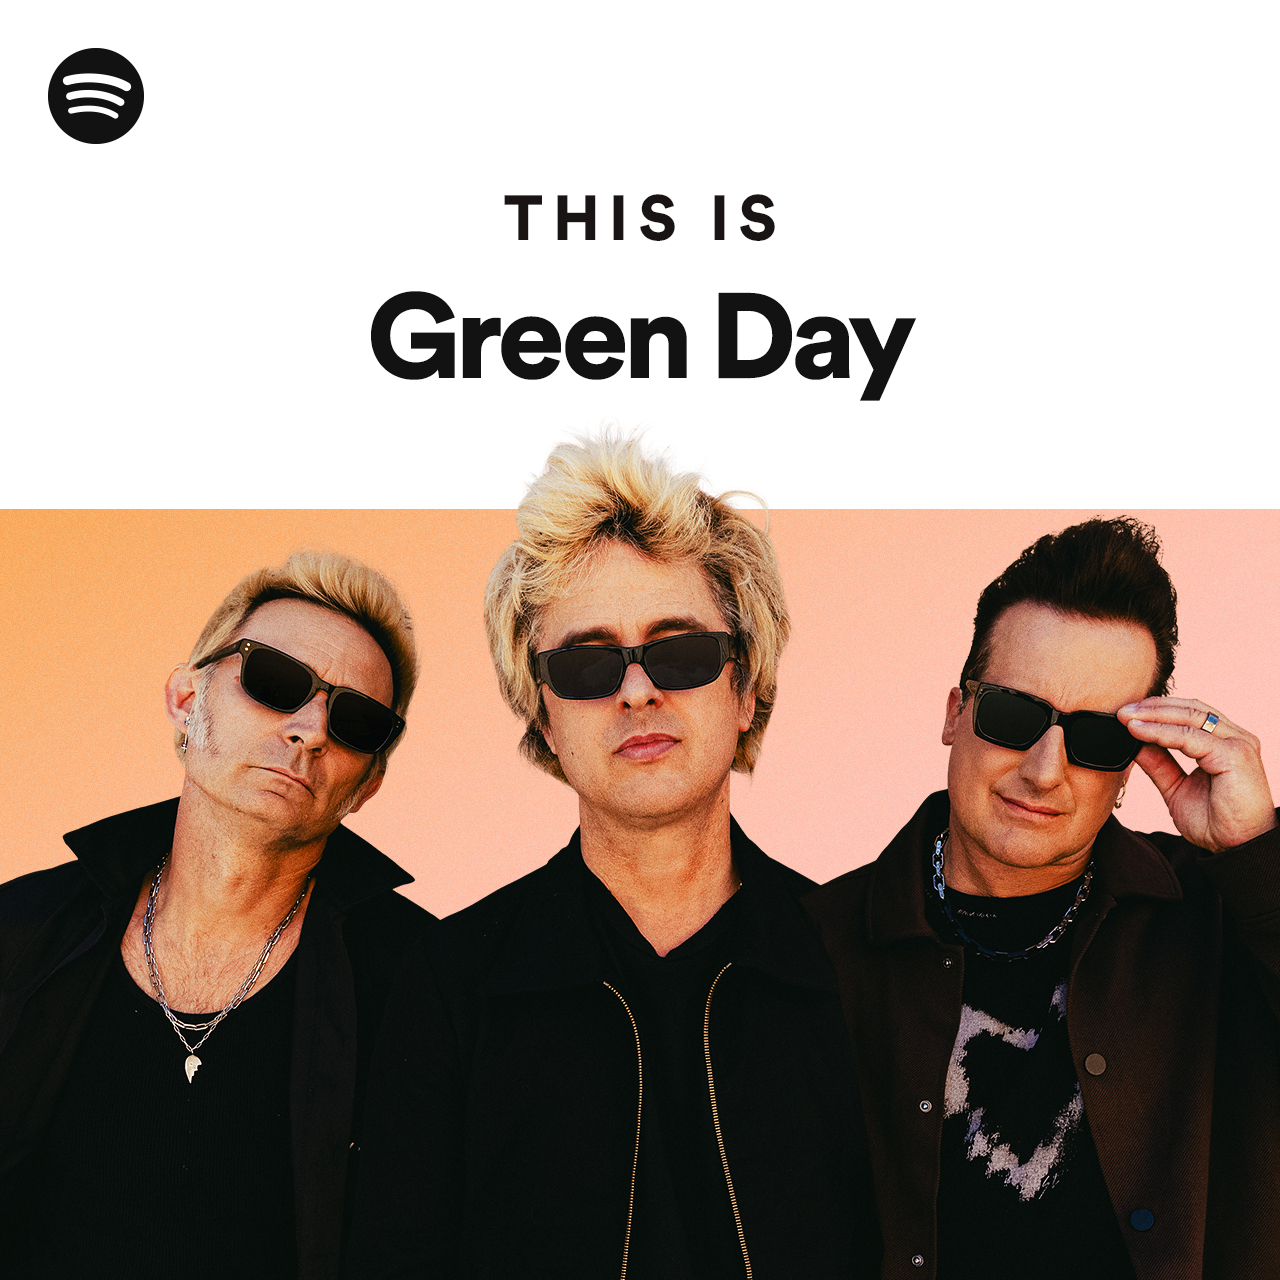 This Is Green Day - playlist by Spotify